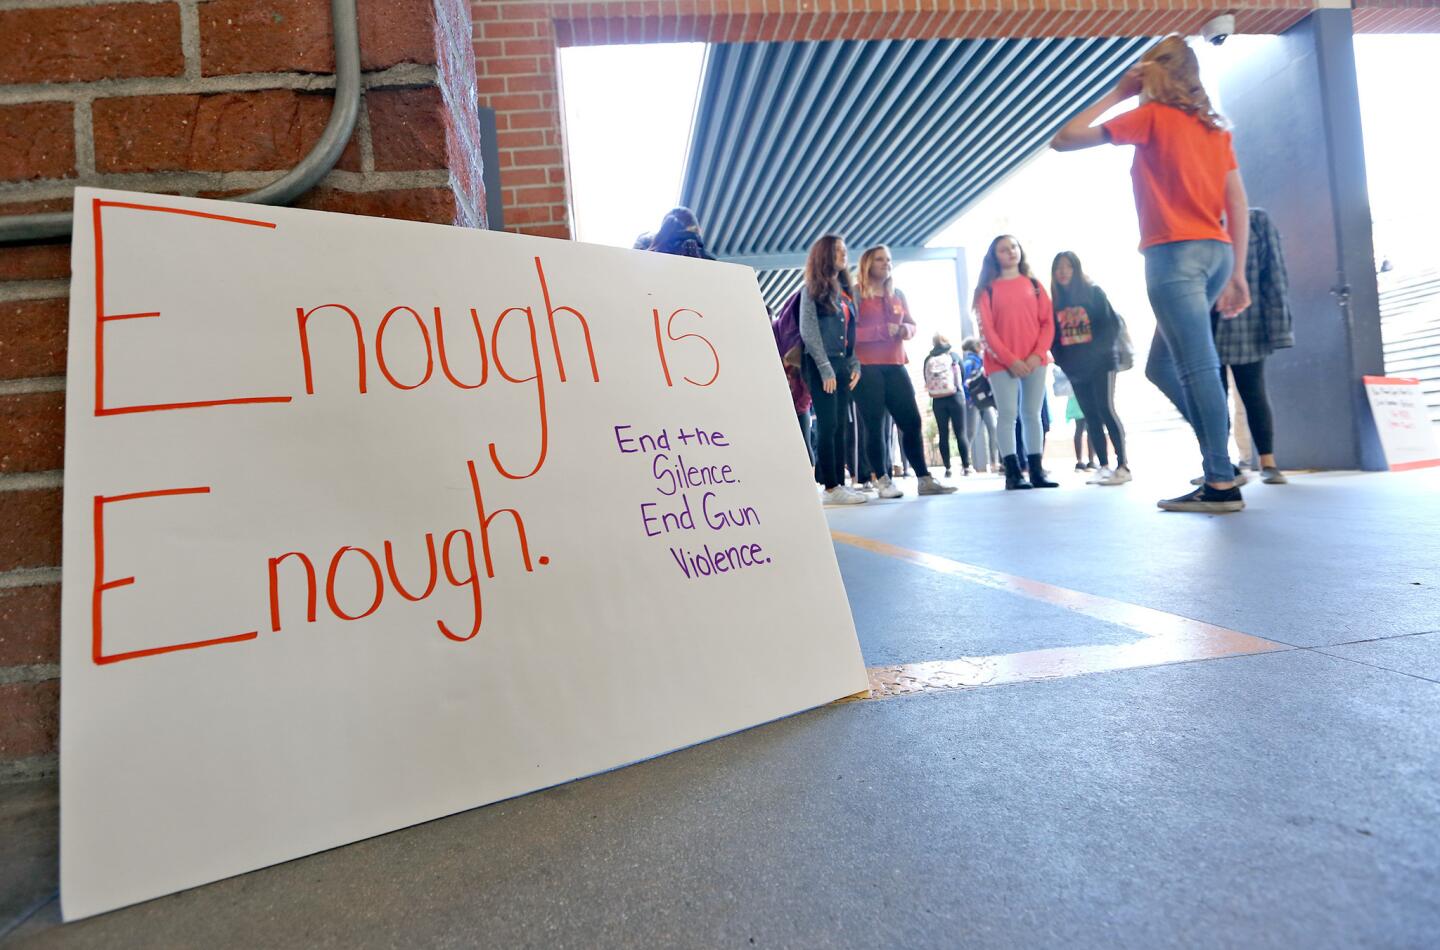 Photo Gallery: Rosemont Middle School “Die-Inevent" for stricter gun laws